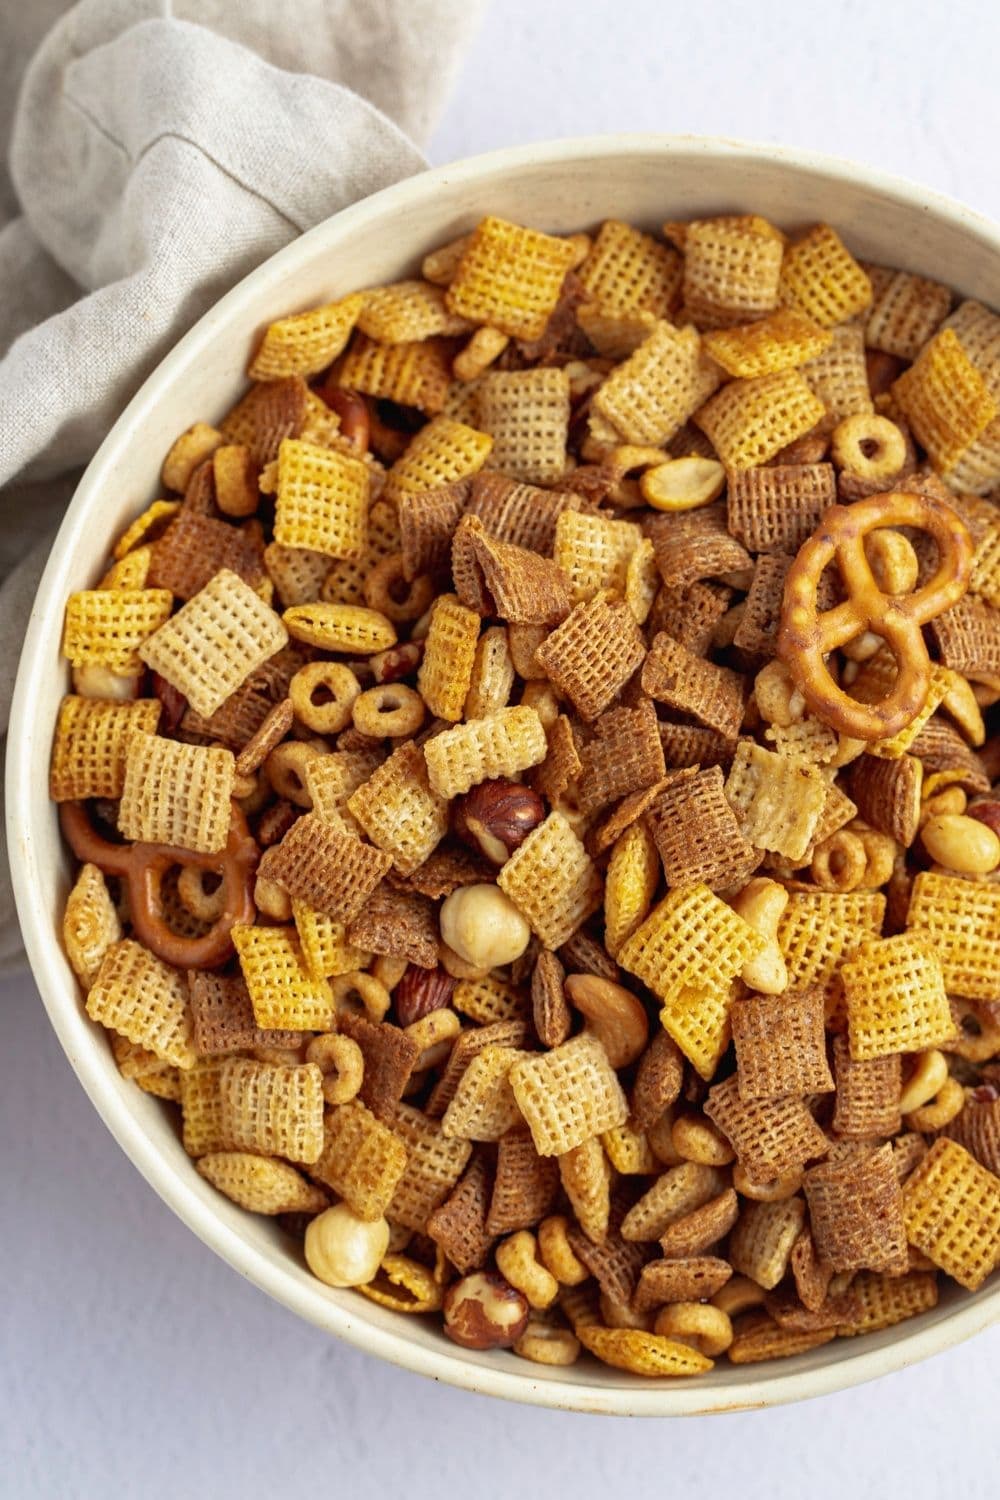 Combination of Chex cereals, pretzels, and nuts in a bowl.